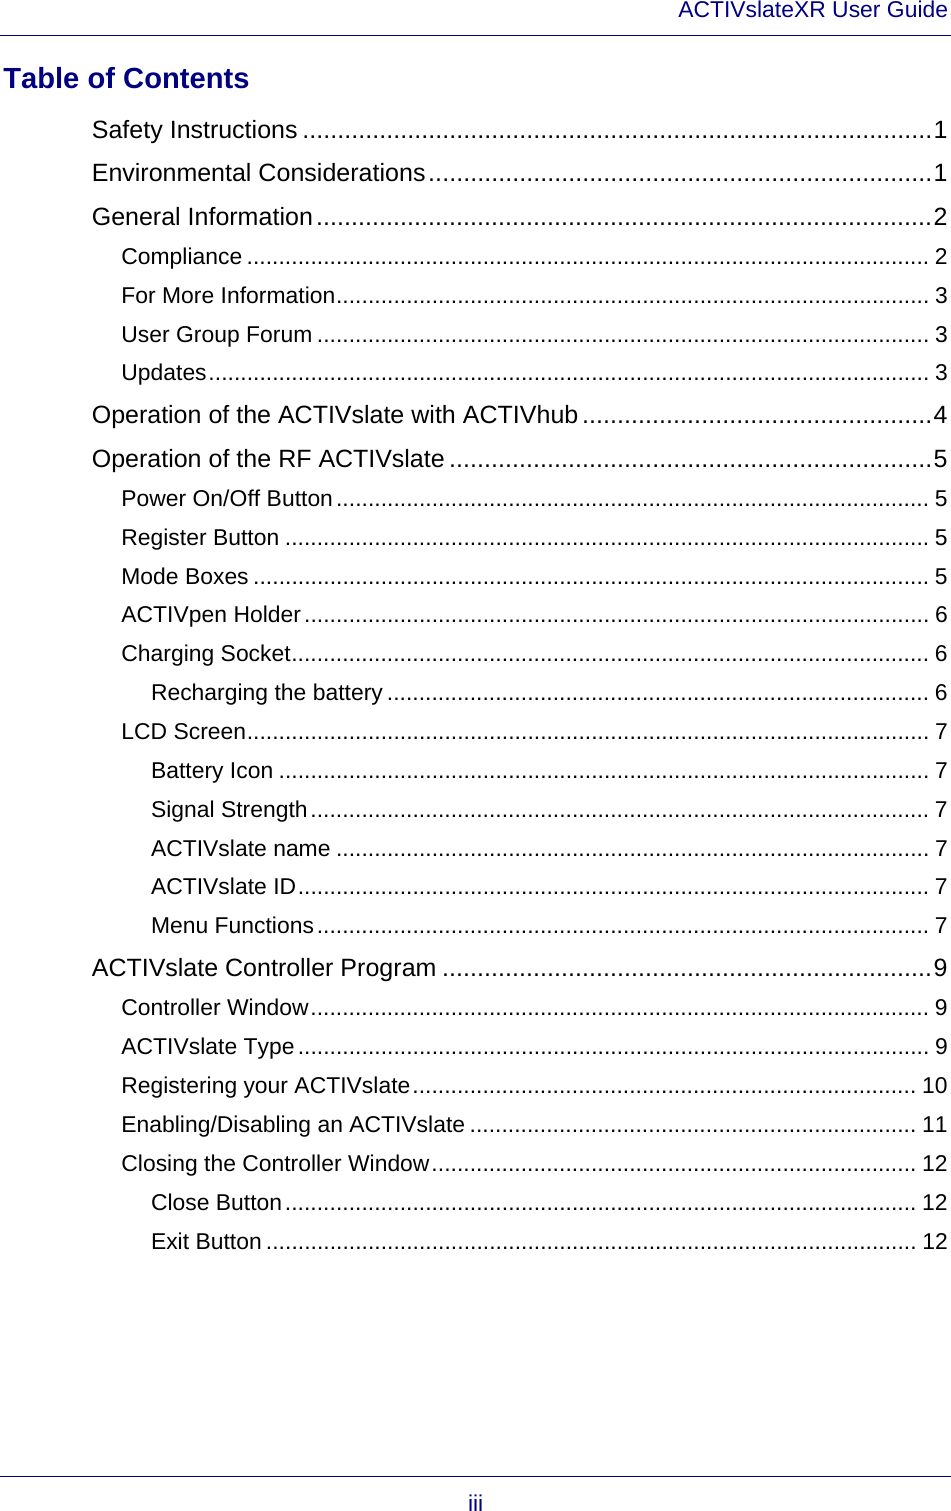 ACTIVslateXR User Guide iii Table of Contents Safety Instructions ..........................................................................................1 Environmental Considerations........................................................................1 General Information........................................................................................2 Compliance ........................................................................................................... 2 For More Information............................................................................................. 3 User Group Forum ................................................................................................ 3 Updates................................................................................................................. 3 Operation of the ACTIVslate with ACTIVhub ..................................................4 Operation of the RF ACTIVslate .....................................................................5 Power On/Off Button............................................................................................. 5 Register Button ..................................................................................................... 5 Mode Boxes .......................................................................................................... 5 ACTIVpen Holder.................................................................................................. 6 Charging Socket.................................................................................................... 6 Recharging the battery ..................................................................................... 6 LCD Screen........................................................................................................... 7 Battery Icon ...................................................................................................... 7 Signal Strength................................................................................................. 7 ACTIVslate name ............................................................................................. 7 ACTIVslate ID................................................................................................... 7 Menu Functions................................................................................................ 7 ACTIVslate Controller Program ......................................................................9 Controller Window................................................................................................. 9 ACTIVslate Type................................................................................................... 9 Registering your ACTIVslate............................................................................... 10 Enabling/Disabling an ACTIVslate ...................................................................... 11 Closing the Controller Window............................................................................ 12 Close Button................................................................................................... 12 Exit Button ...................................................................................................... 12  